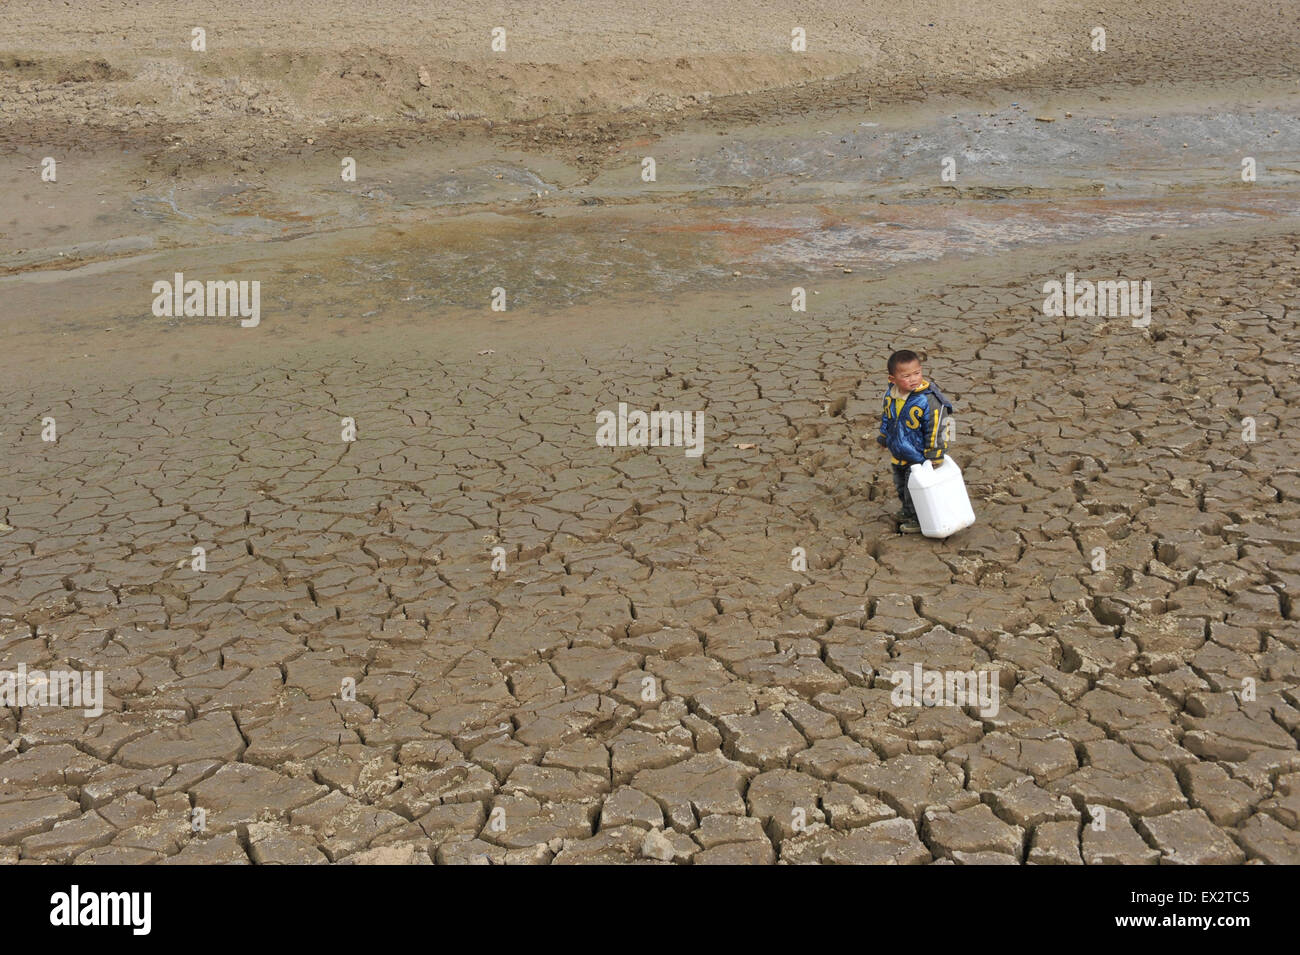 A boy carries a container as he stands on a partially dried-up reservoir in Kaiyang county, Guizhou province, March 16, 2010. A Stock Photo